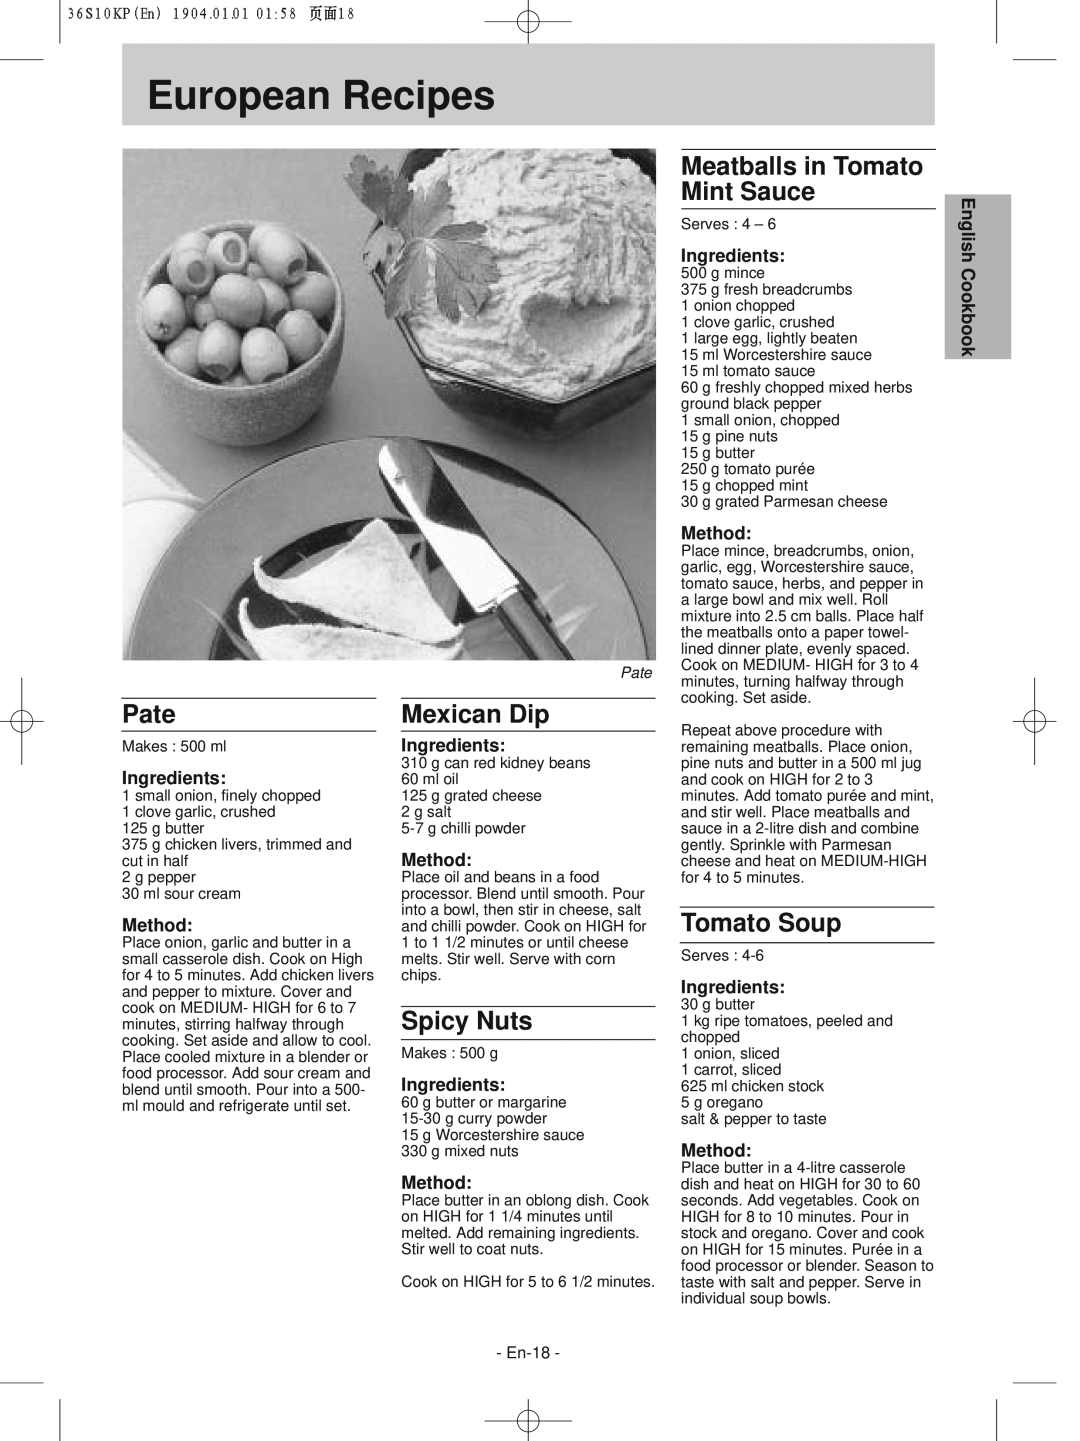 Panasonic NN-S215WF manual European Recipes, Pate, Mexican Dip, Spicy Nuts, Meatballs in Tomato, Mint Sauce, Tomato Soup 